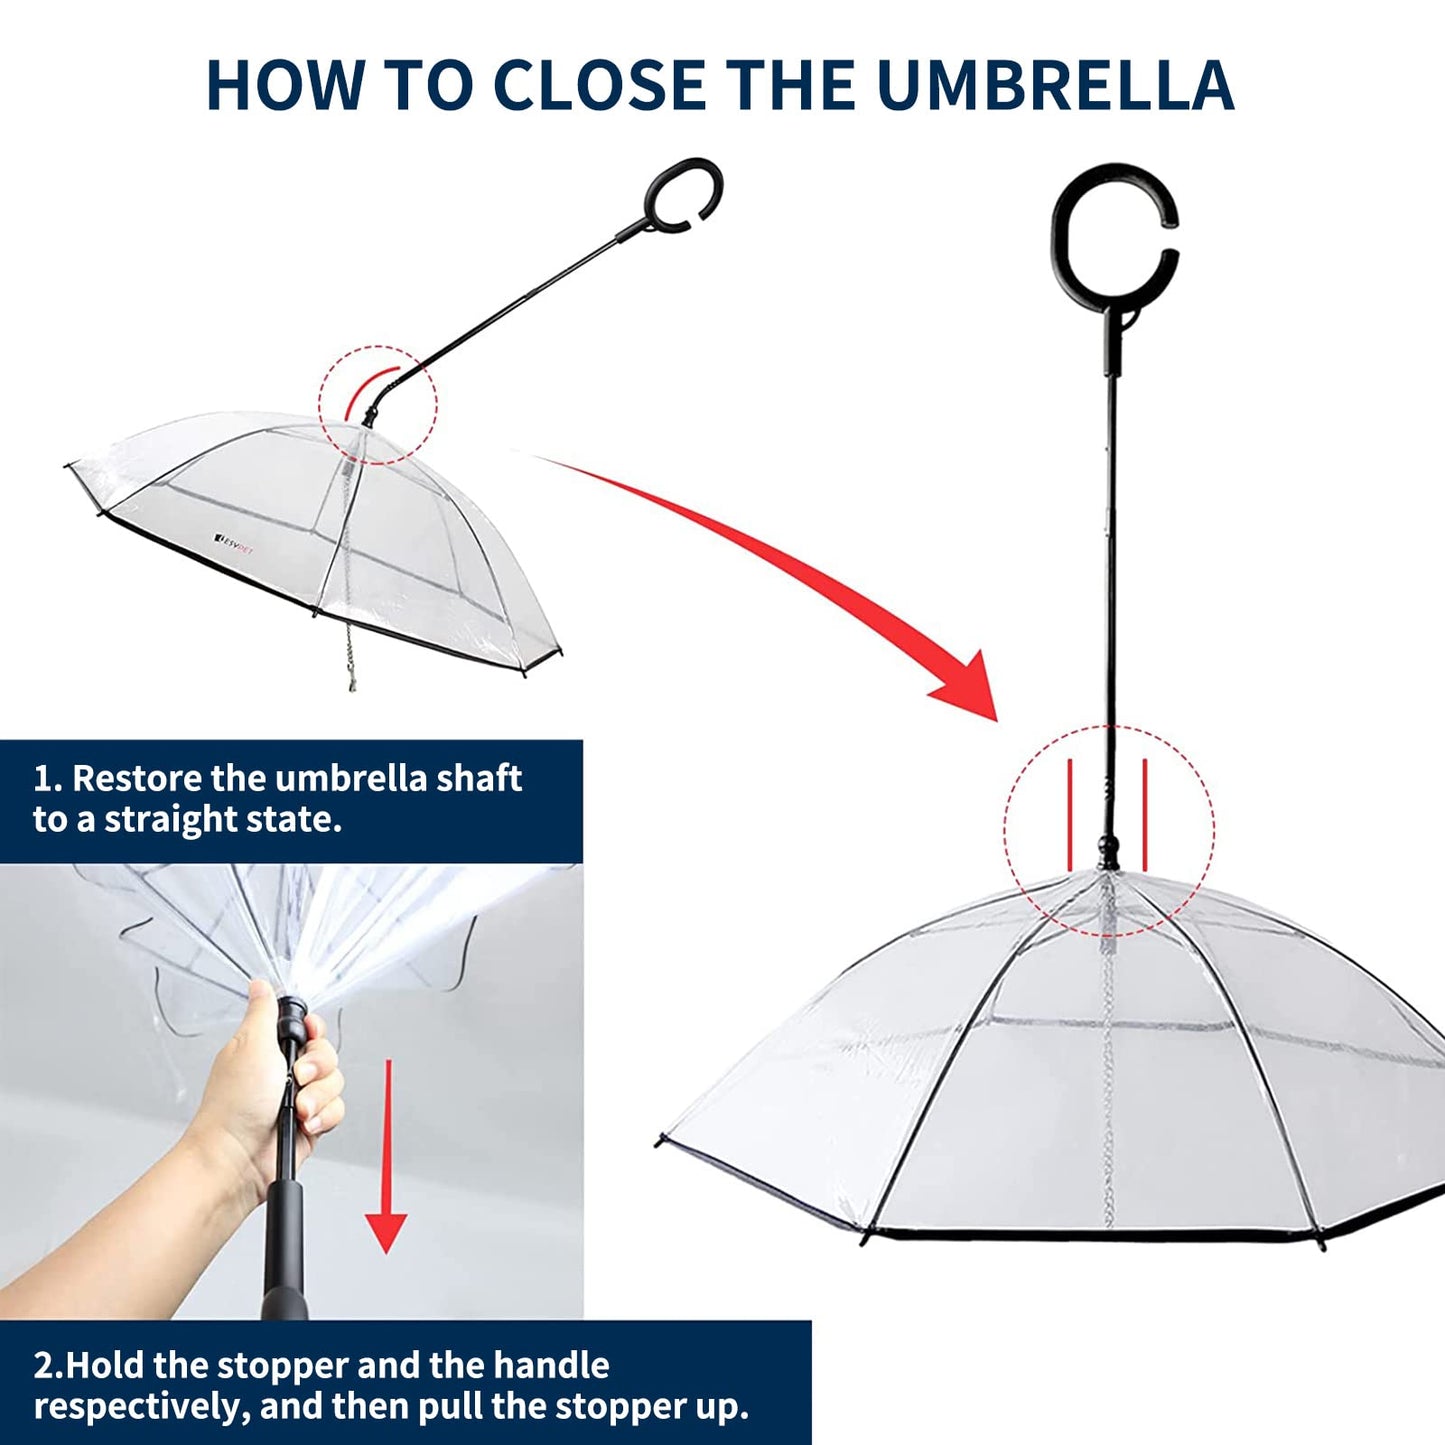 Clear Dog Umbrella with Leash - Small Pets